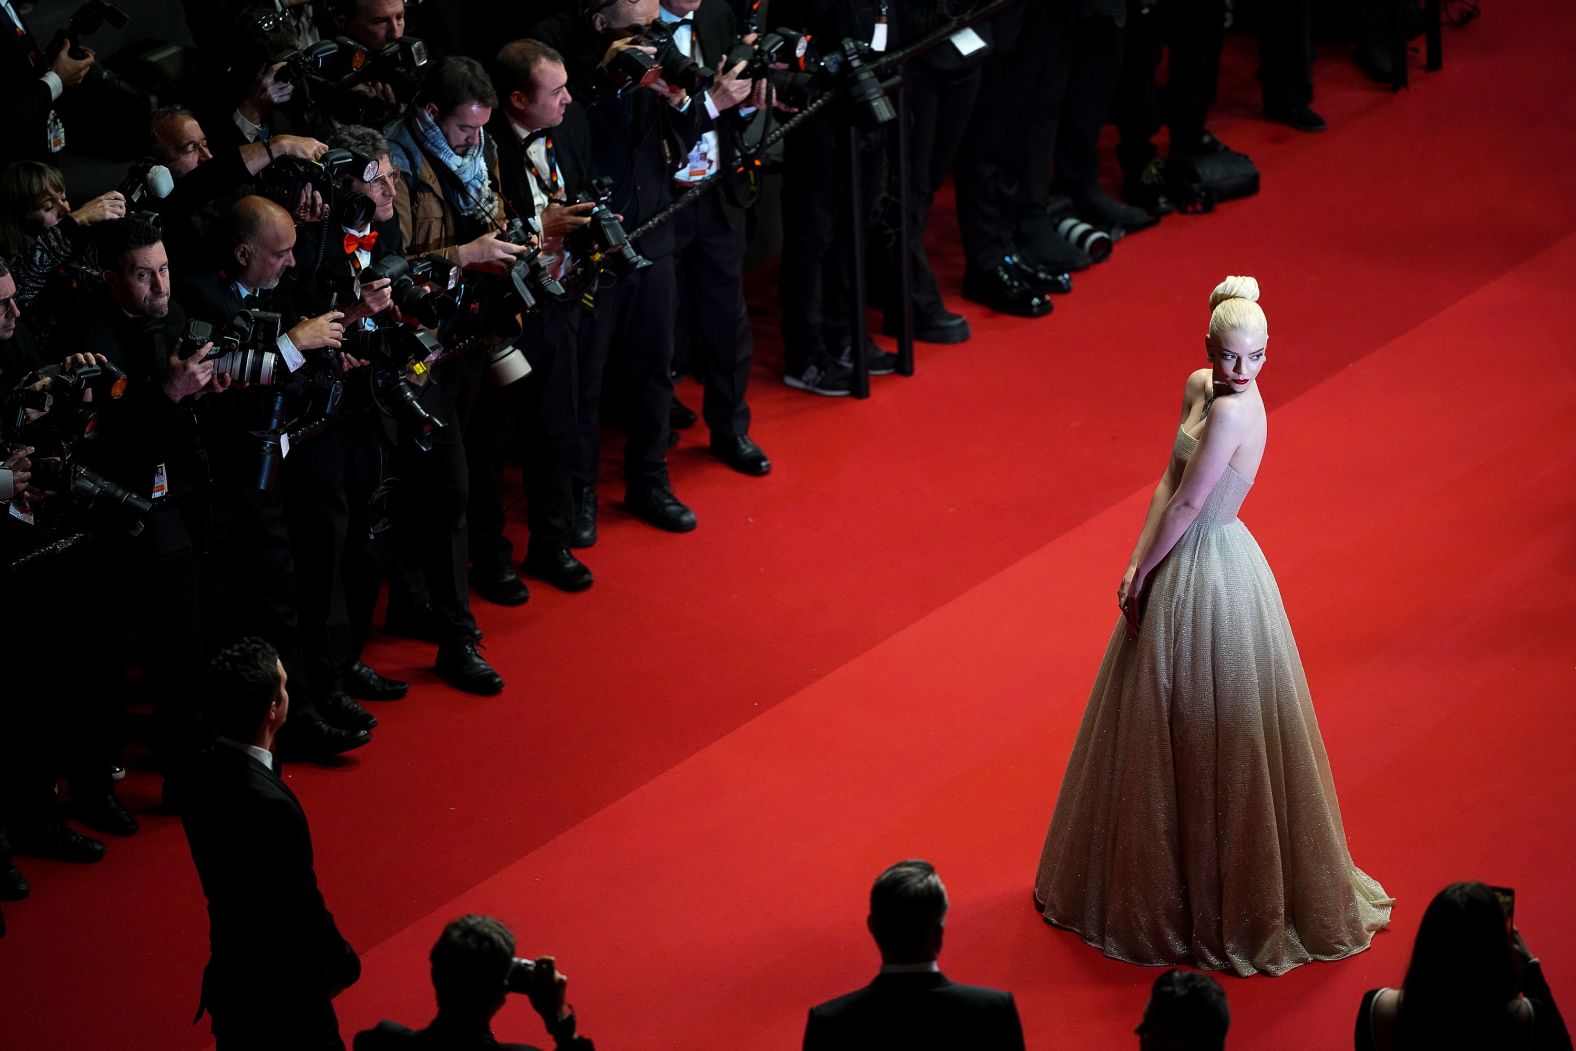 Actress Anya Taylor-Joy poses on the red carpet at the Cannes Film Festival in France on Wednesday, May 15. She stars in "Furiosa: A Mad Max Saga," which was making its premiere at the festival. <a href="index.php?page=&url=https%3A%2F%2Fwww.cnn.com%2F2024%2F05%2F16%2Fstyle%2Fcannes-film-festival-fashion%2Findex.html" target="_blank">See the best fashion from Cannes</a>.